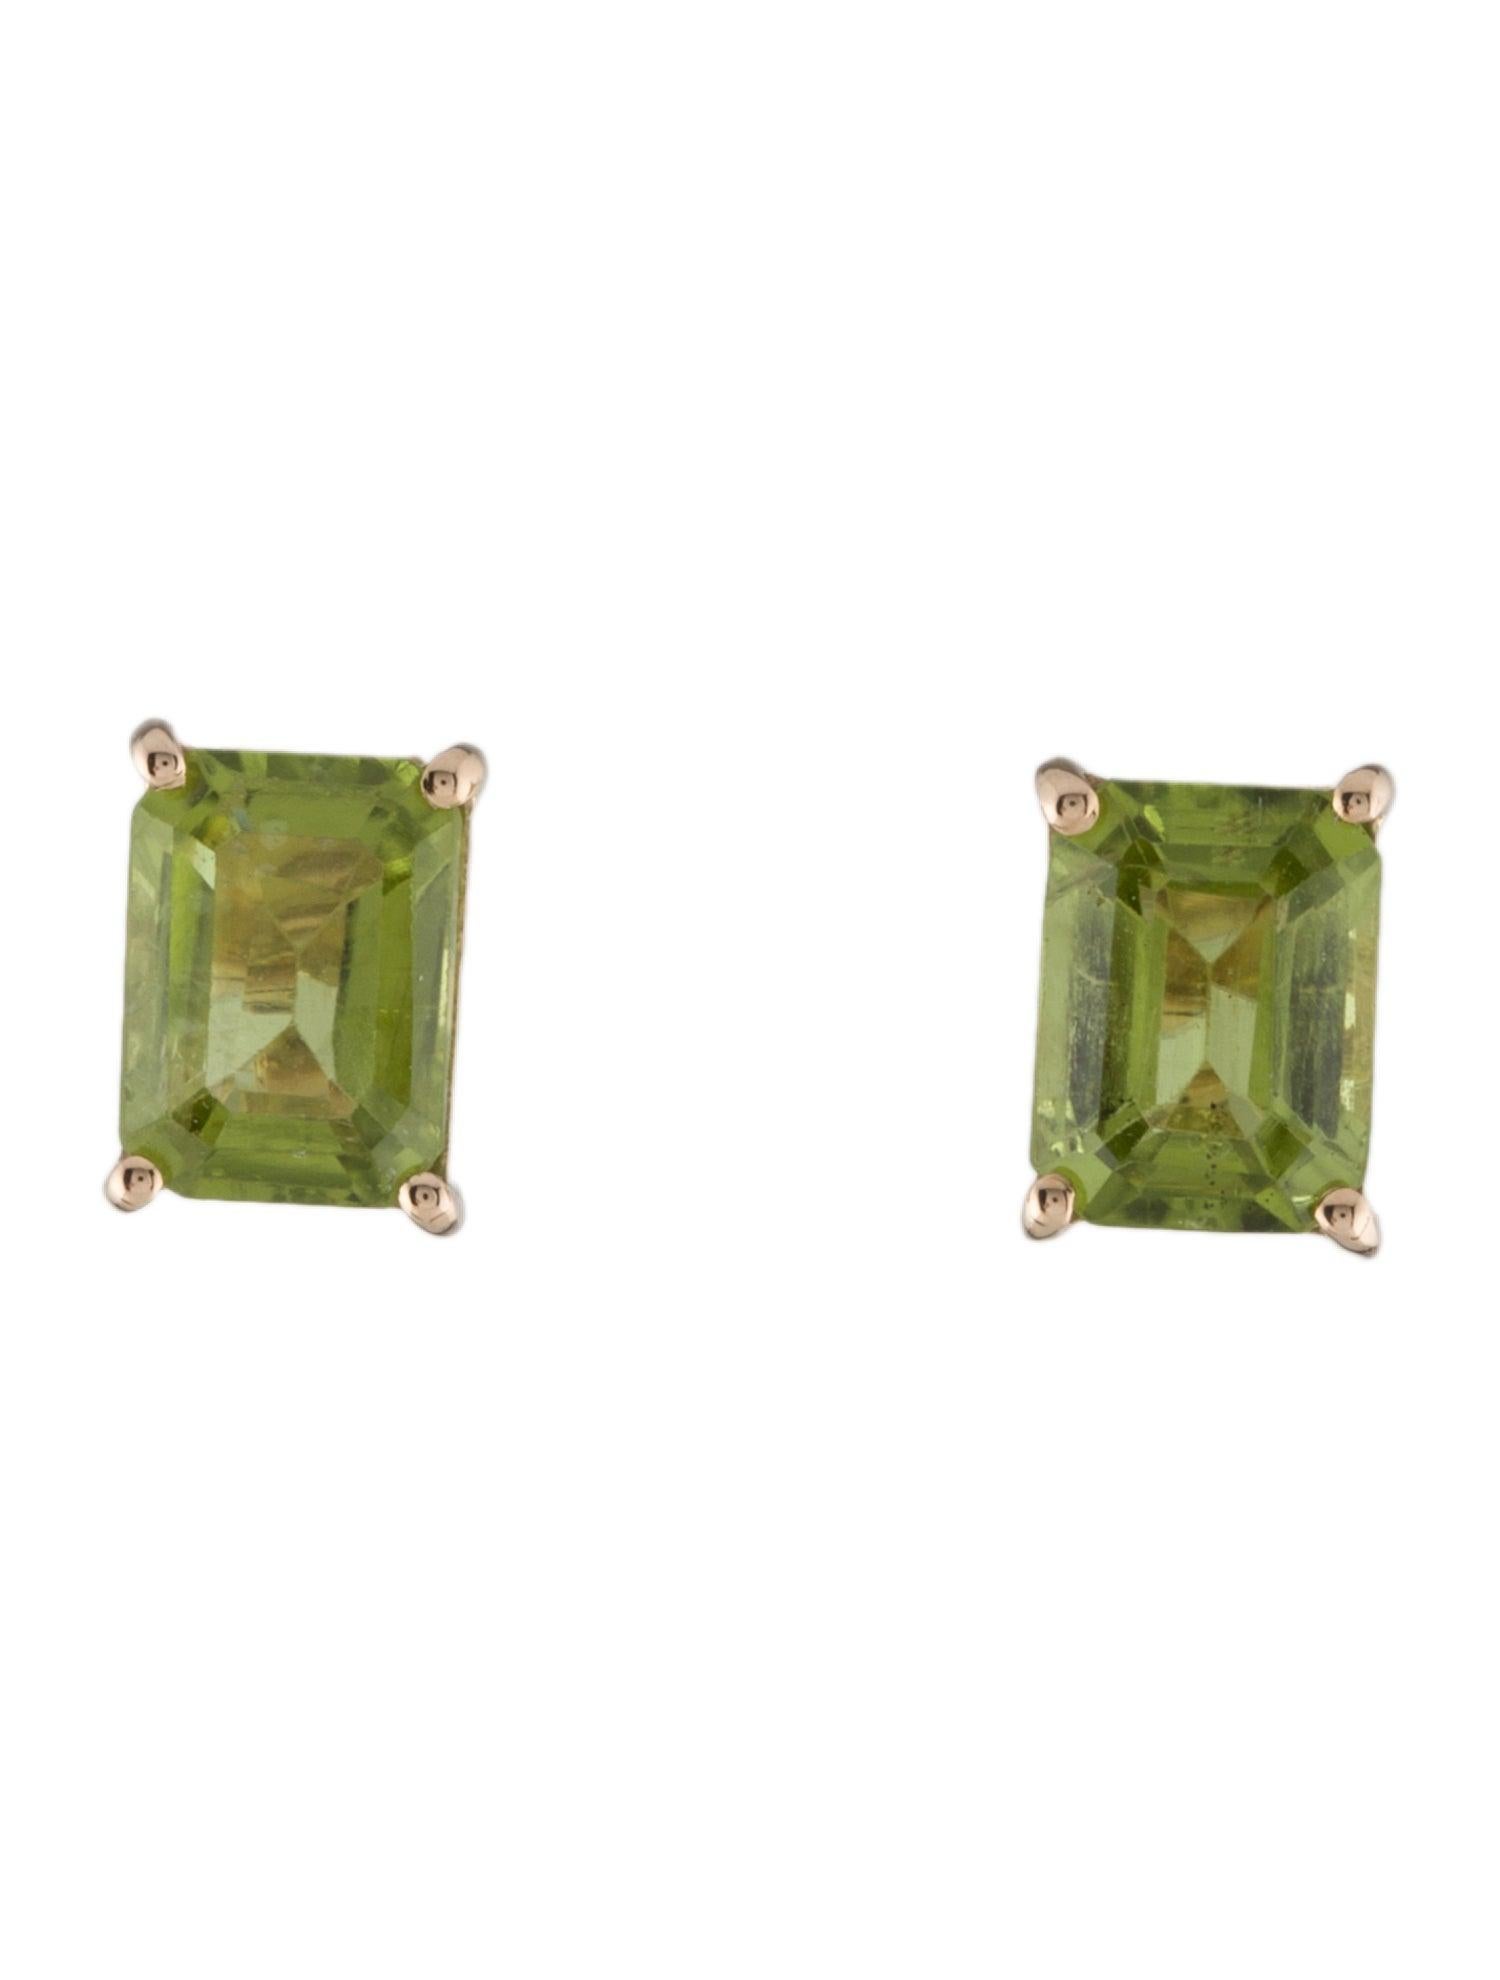 Discover the captivating allure of our 14K Yellow Gold Peridot Stud Earrings, featuring a total of 3.21 carats of cut cornered rectangular step cut peridots. Set in the timeless elegance of 14K yellow gold, these earrings showcase vibrant green